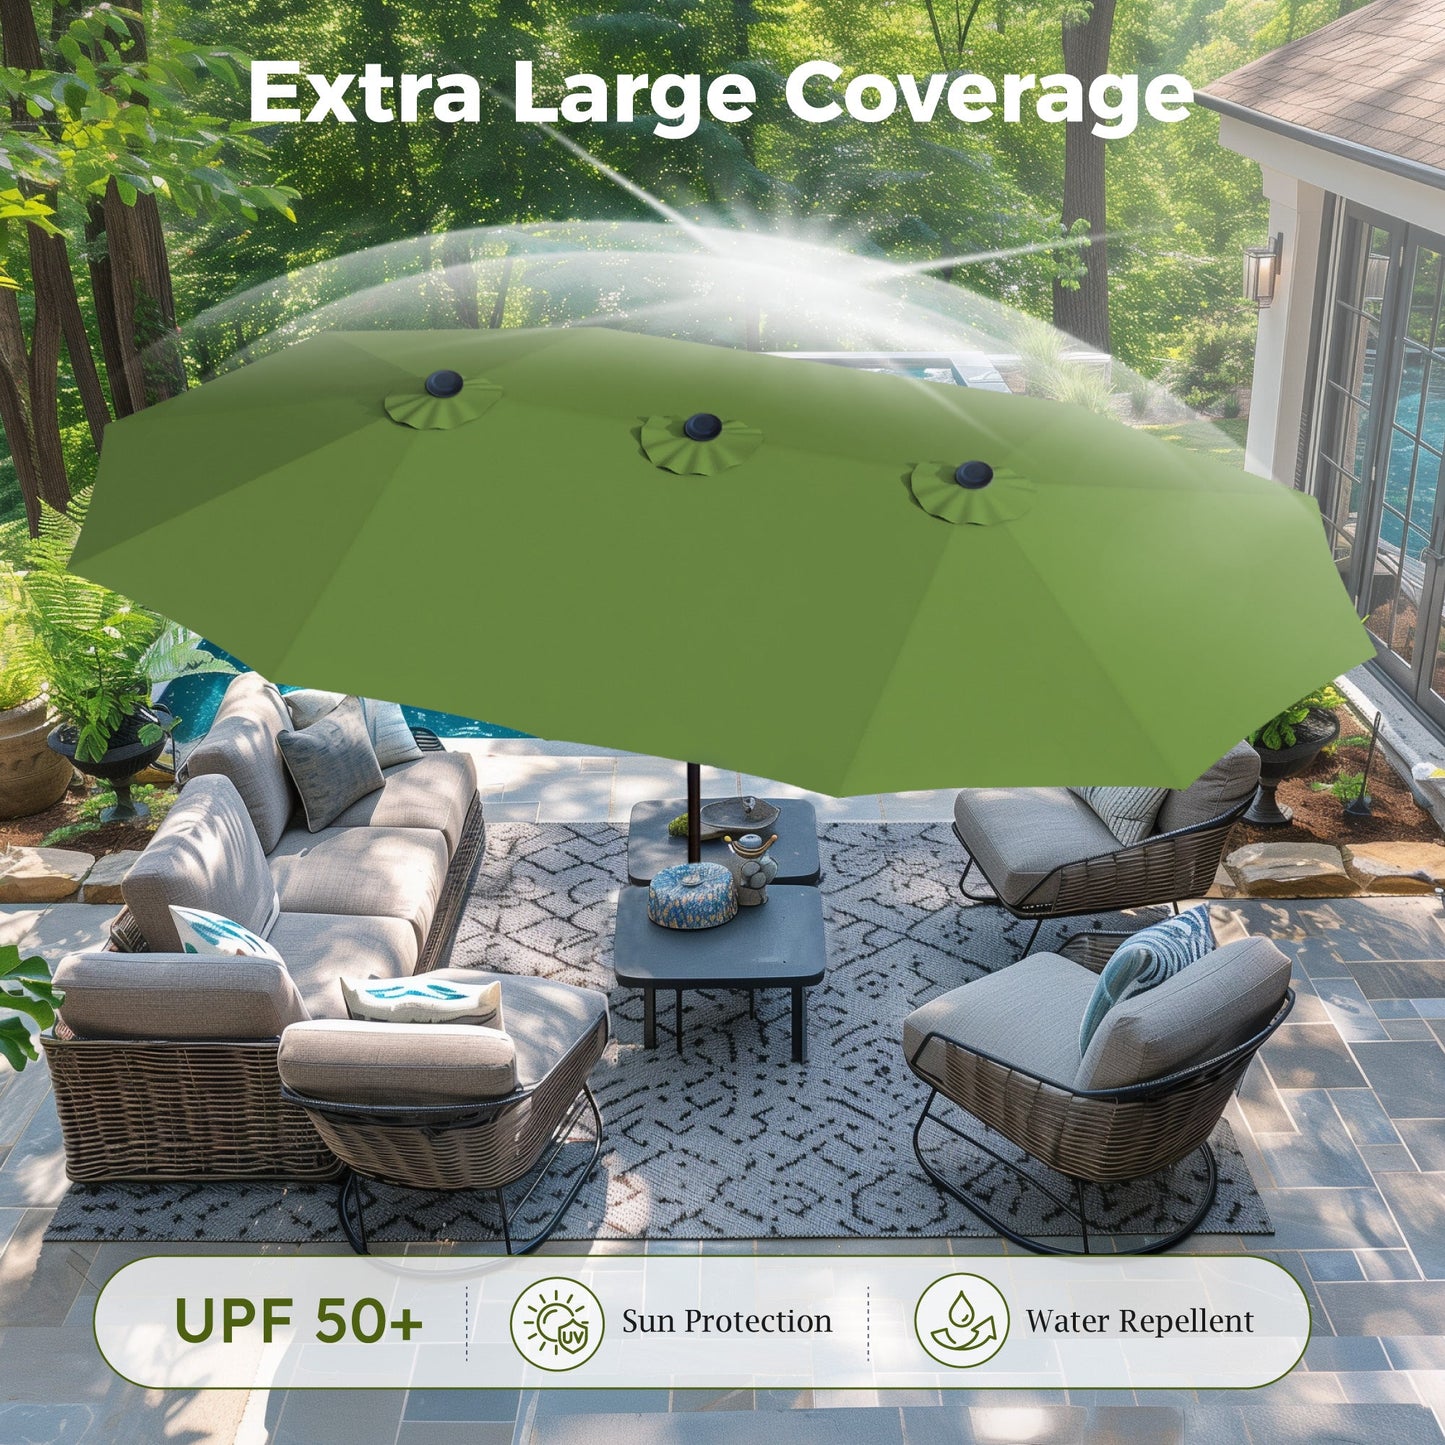 Alpha Joy 15ft Outdoor Patio Umbrella Extra-Large Double-Sided Garden Umbrella with Crank Handle and Base - Lime Green